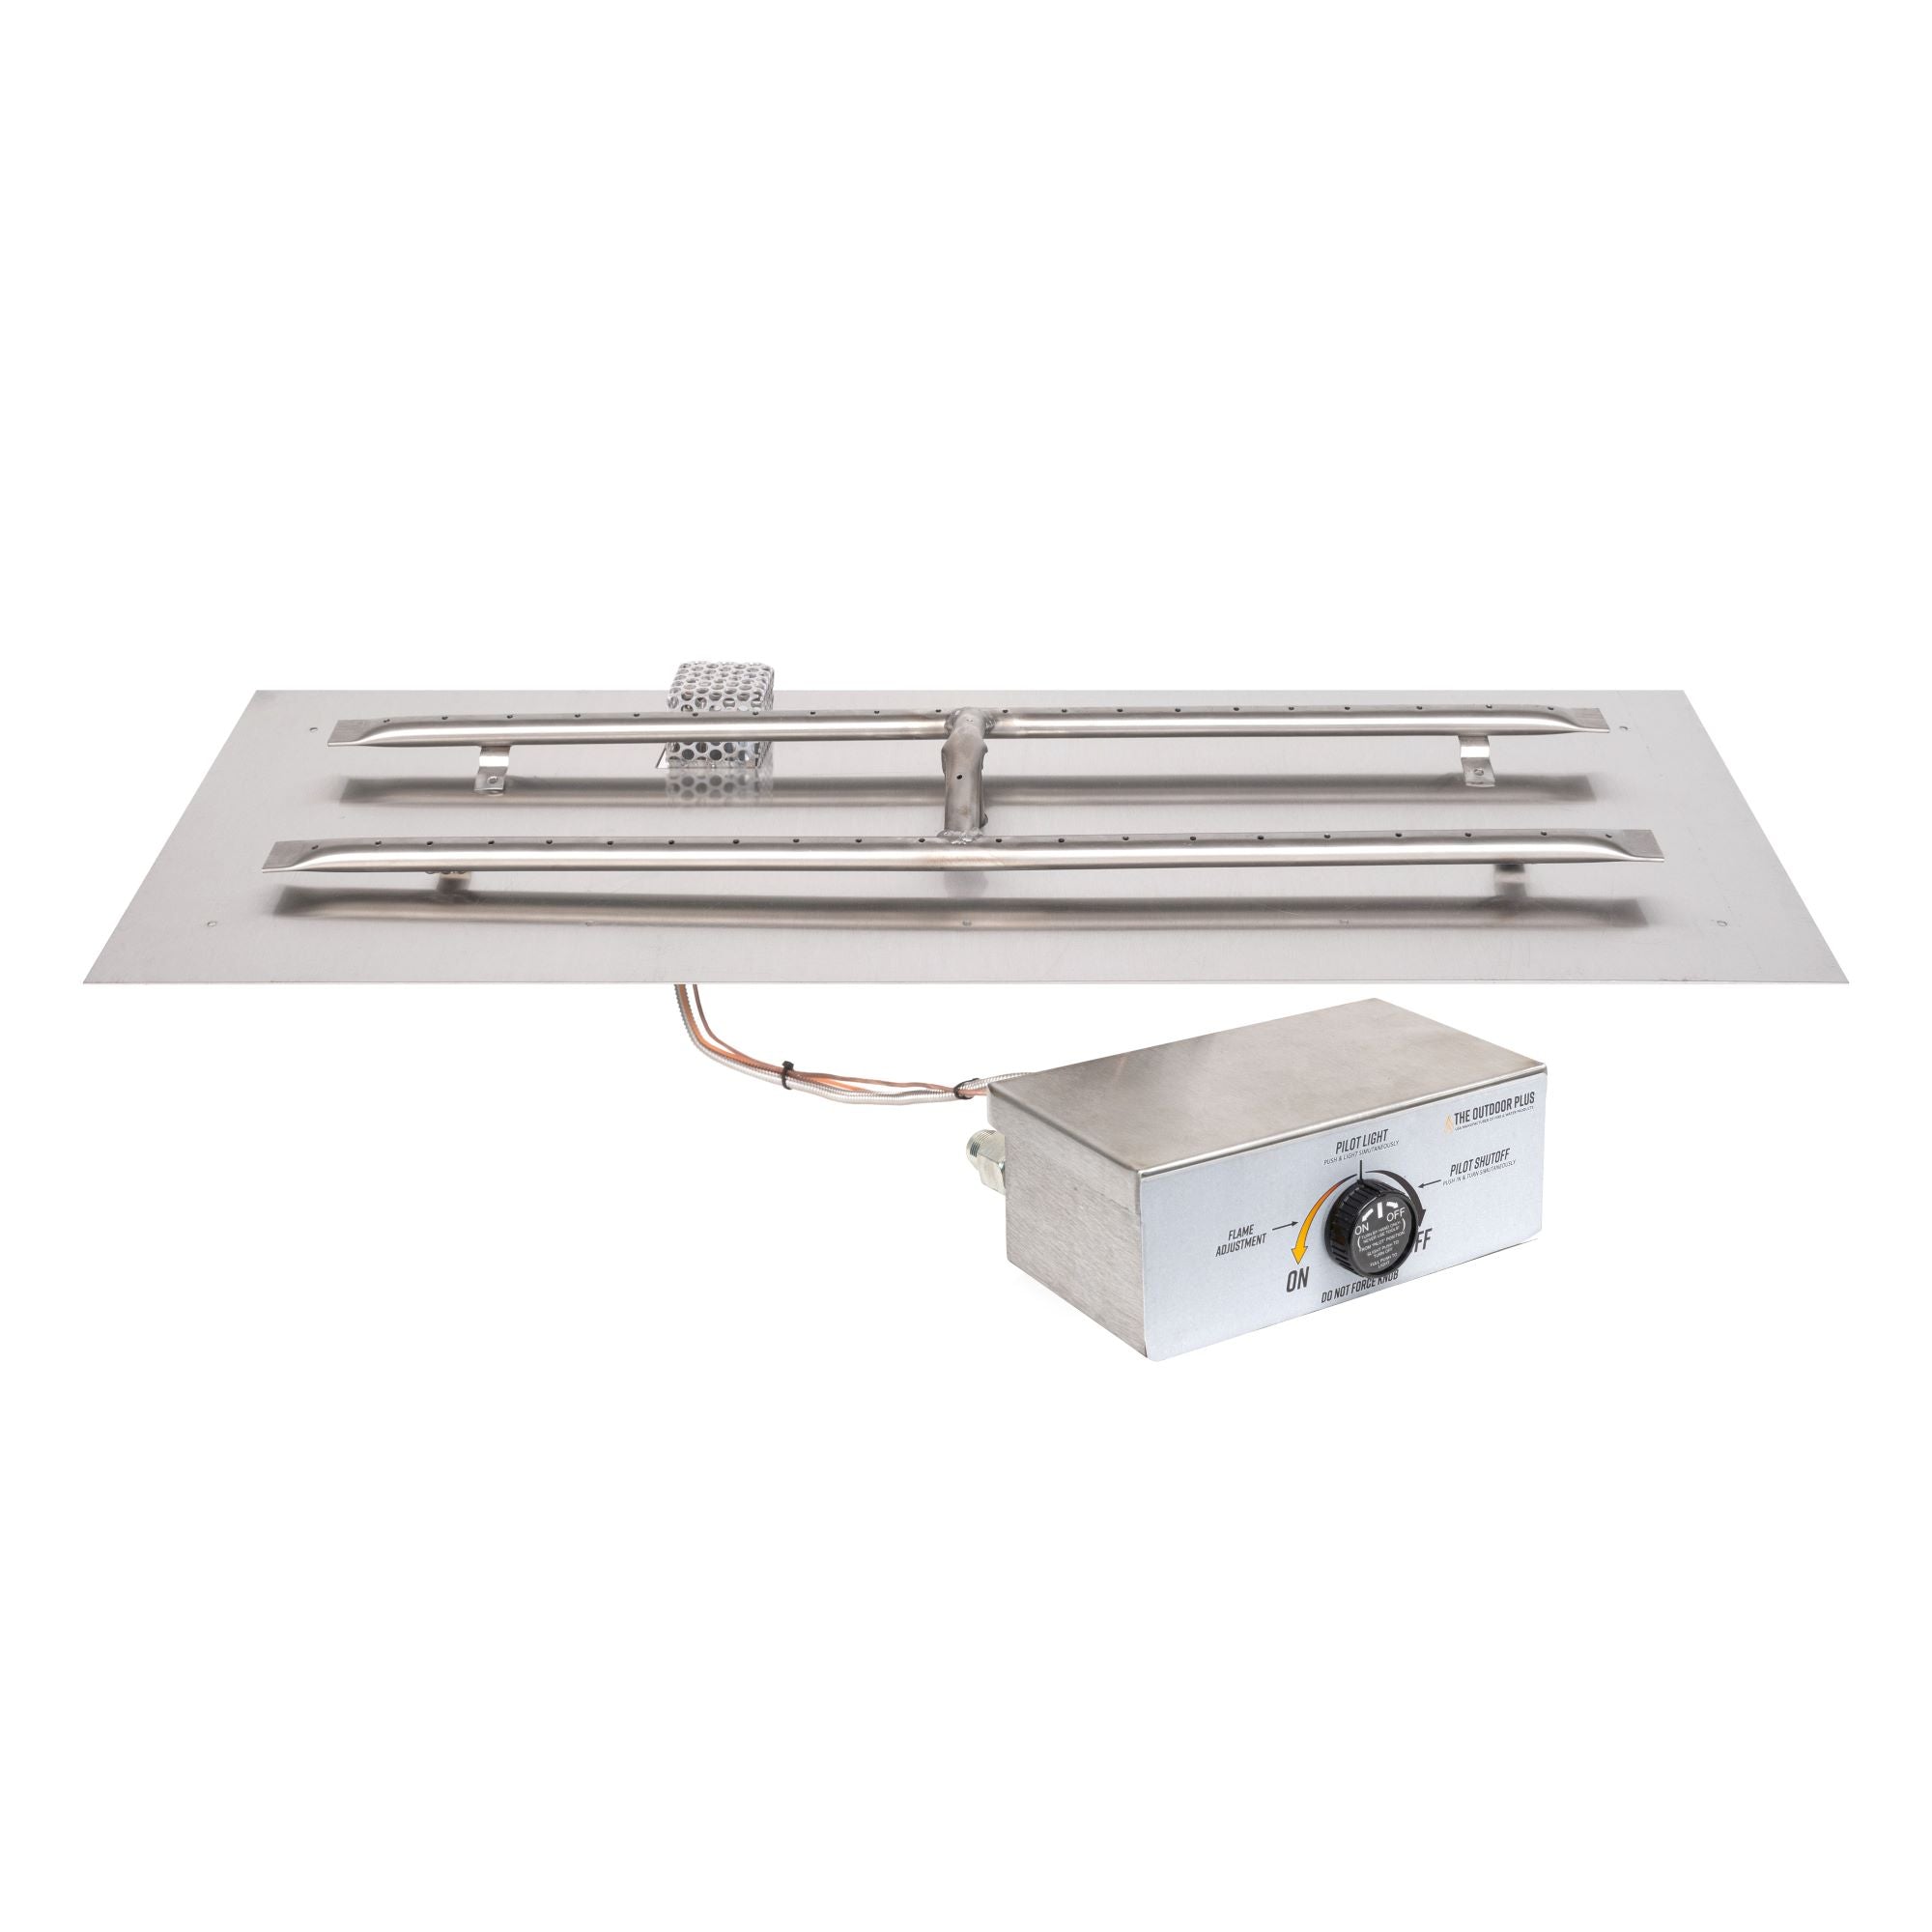 The Outdoor Plus Rectangular Flat Pan 18" With Stainless Steel 'H' Burner